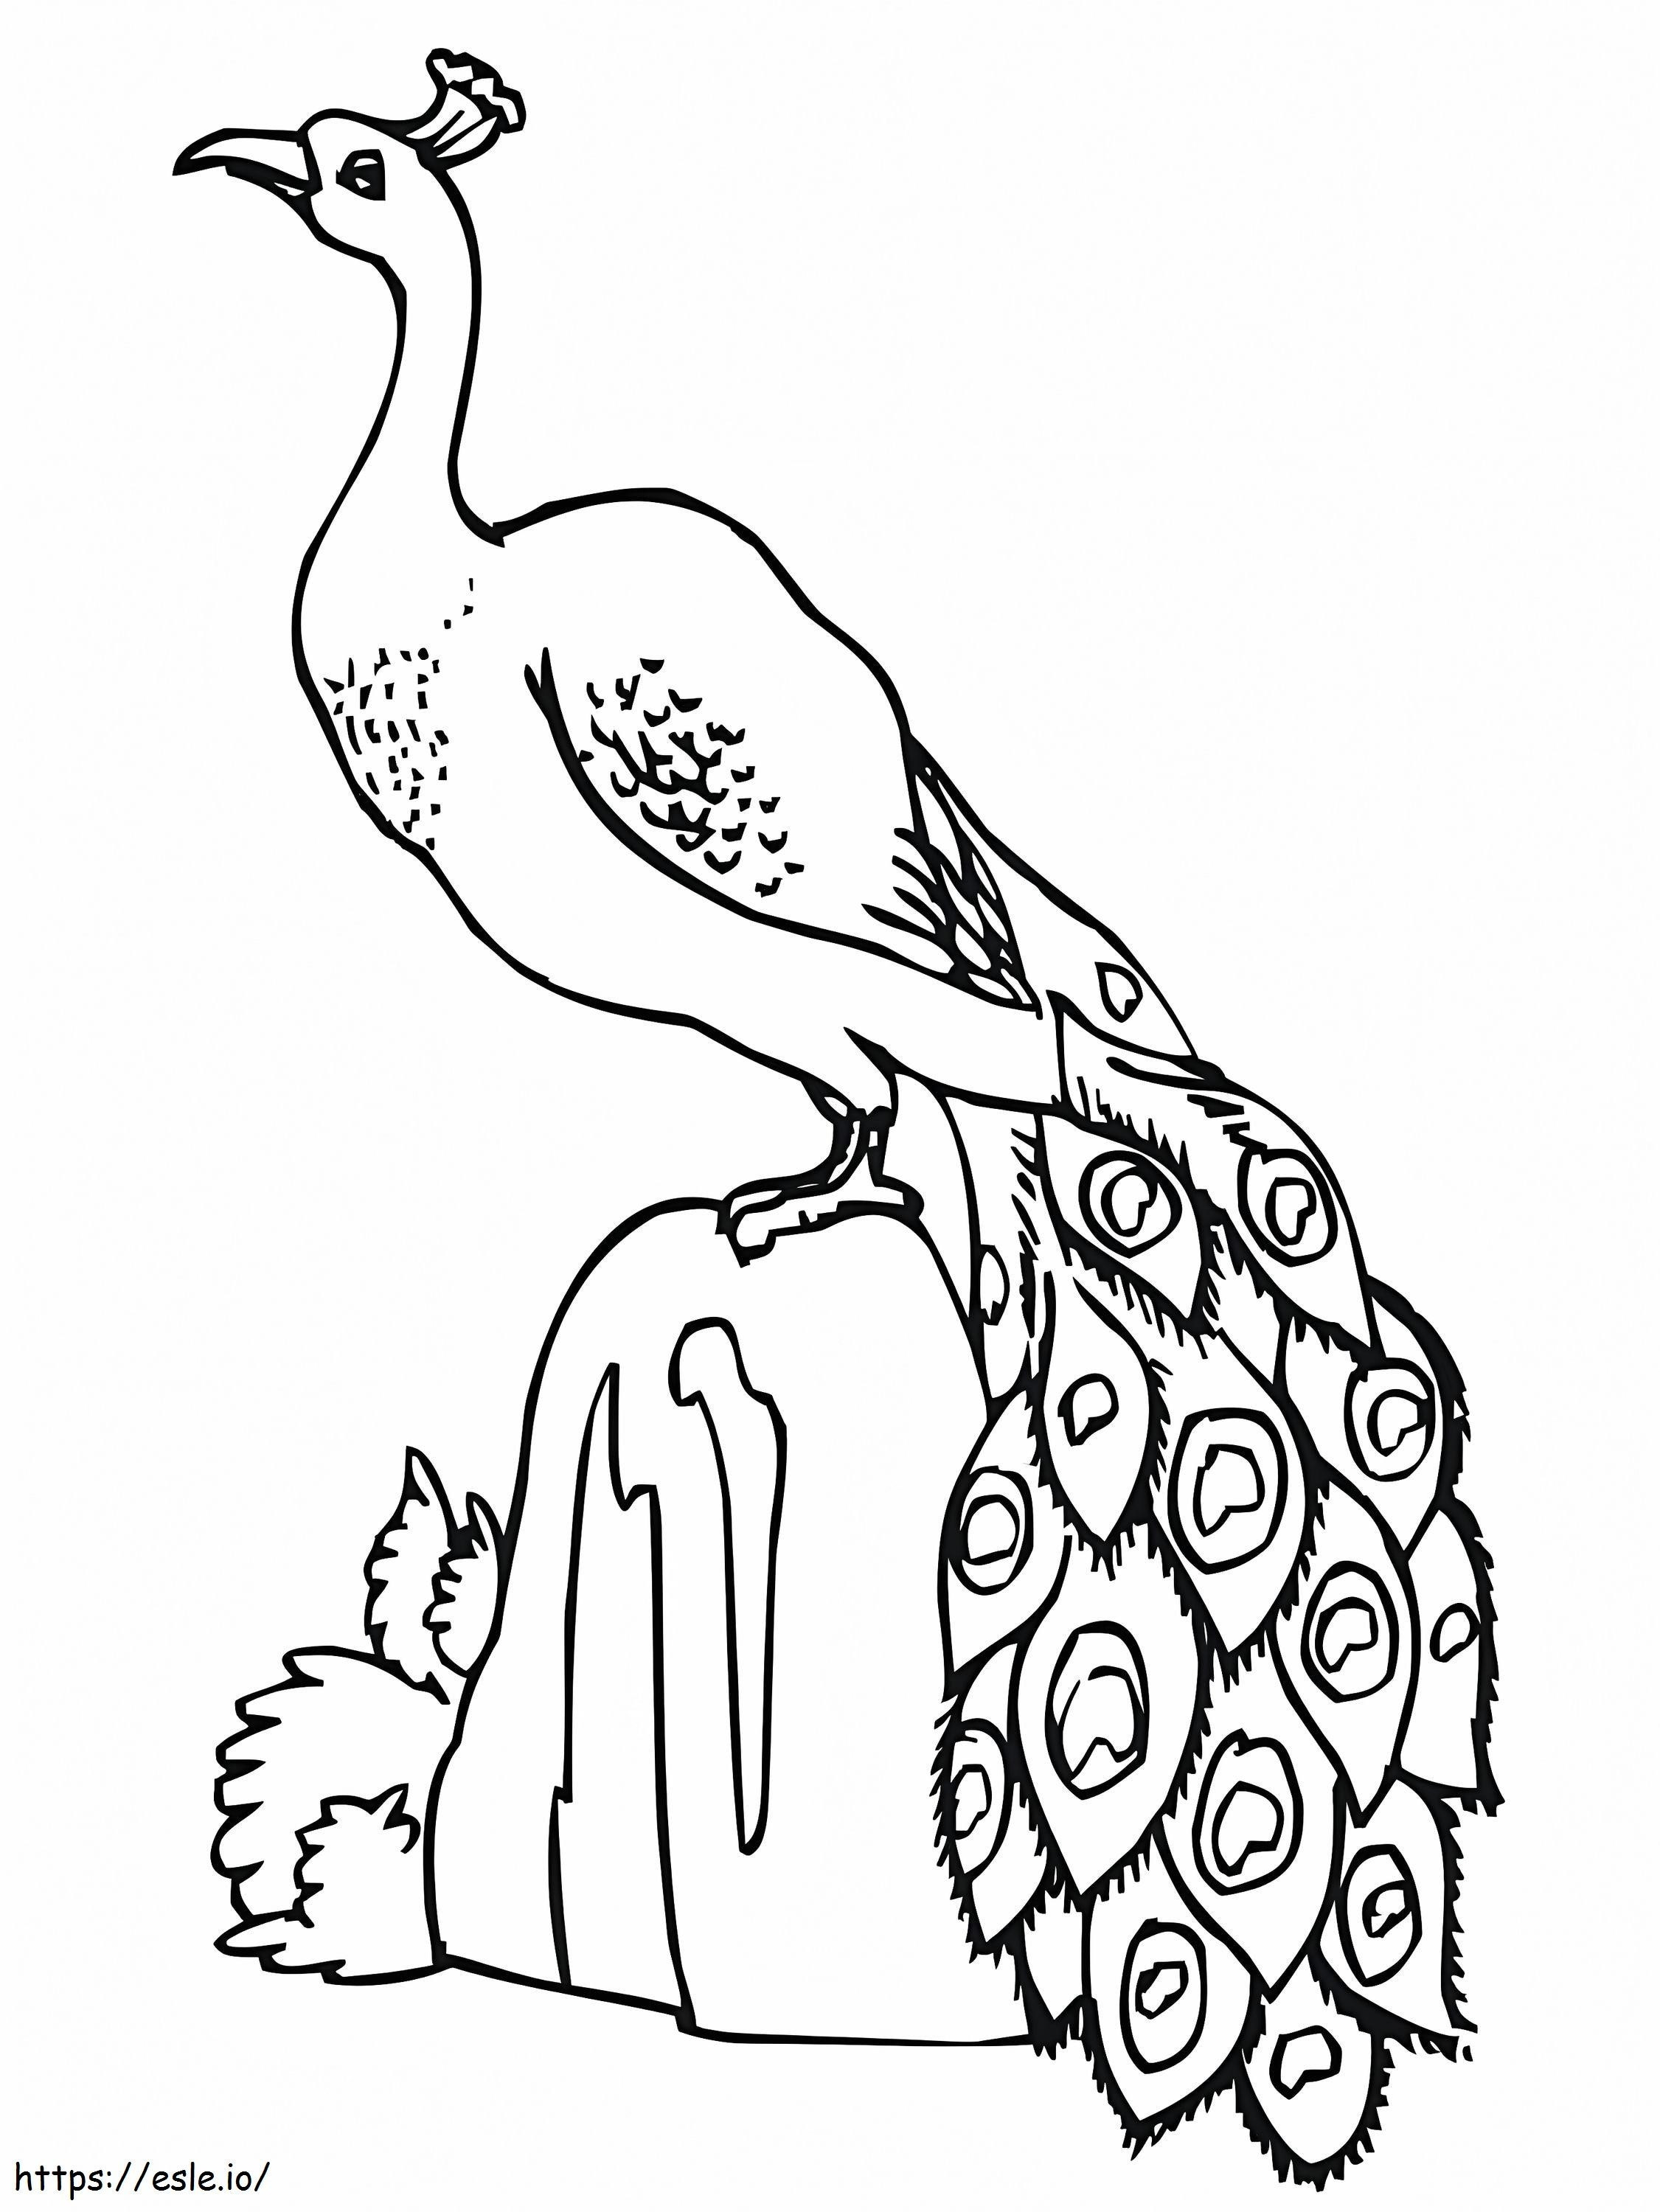 Peacock On A Rock coloring page